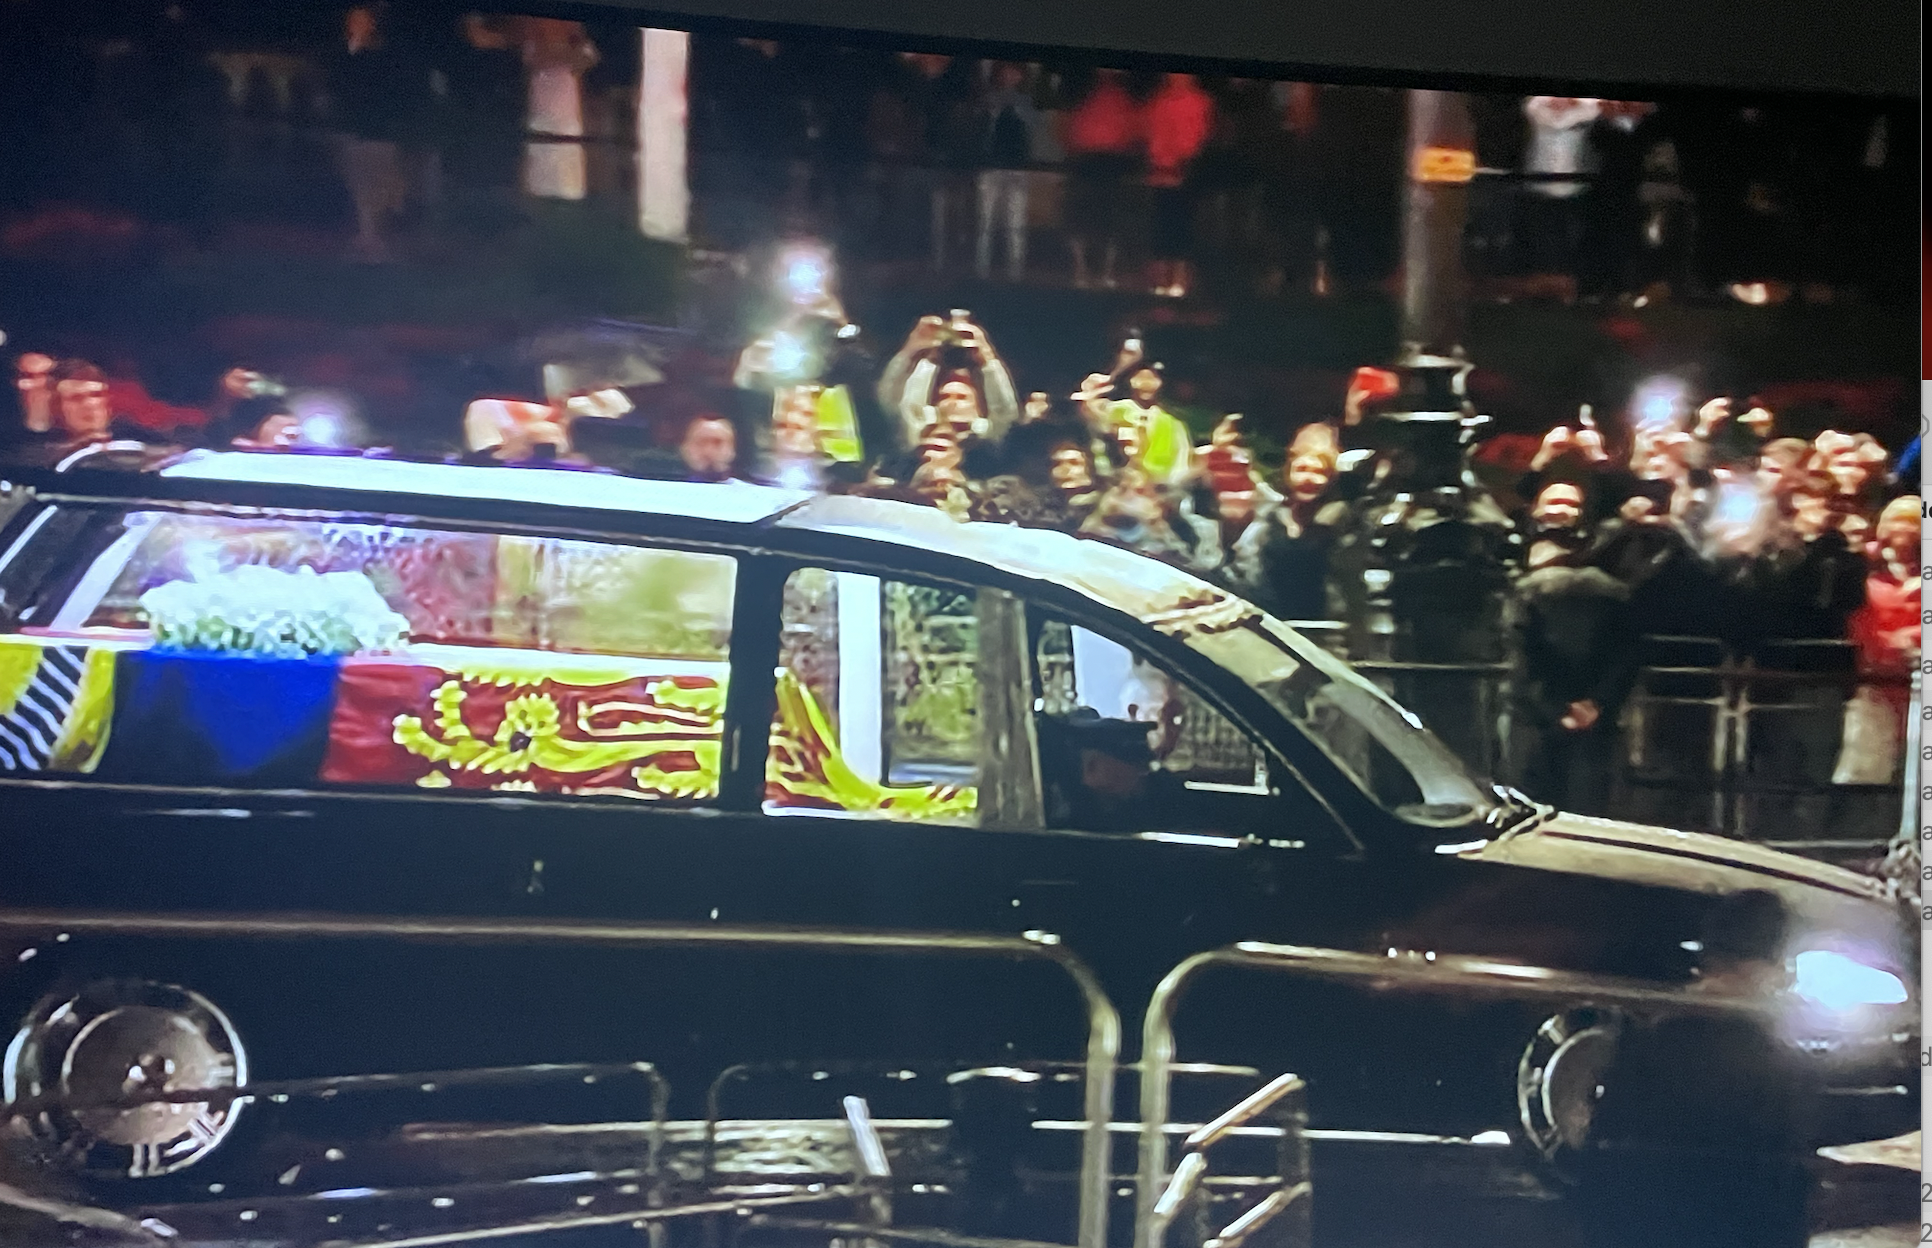 The Queens Coffin  arrives at Buckingham Palace